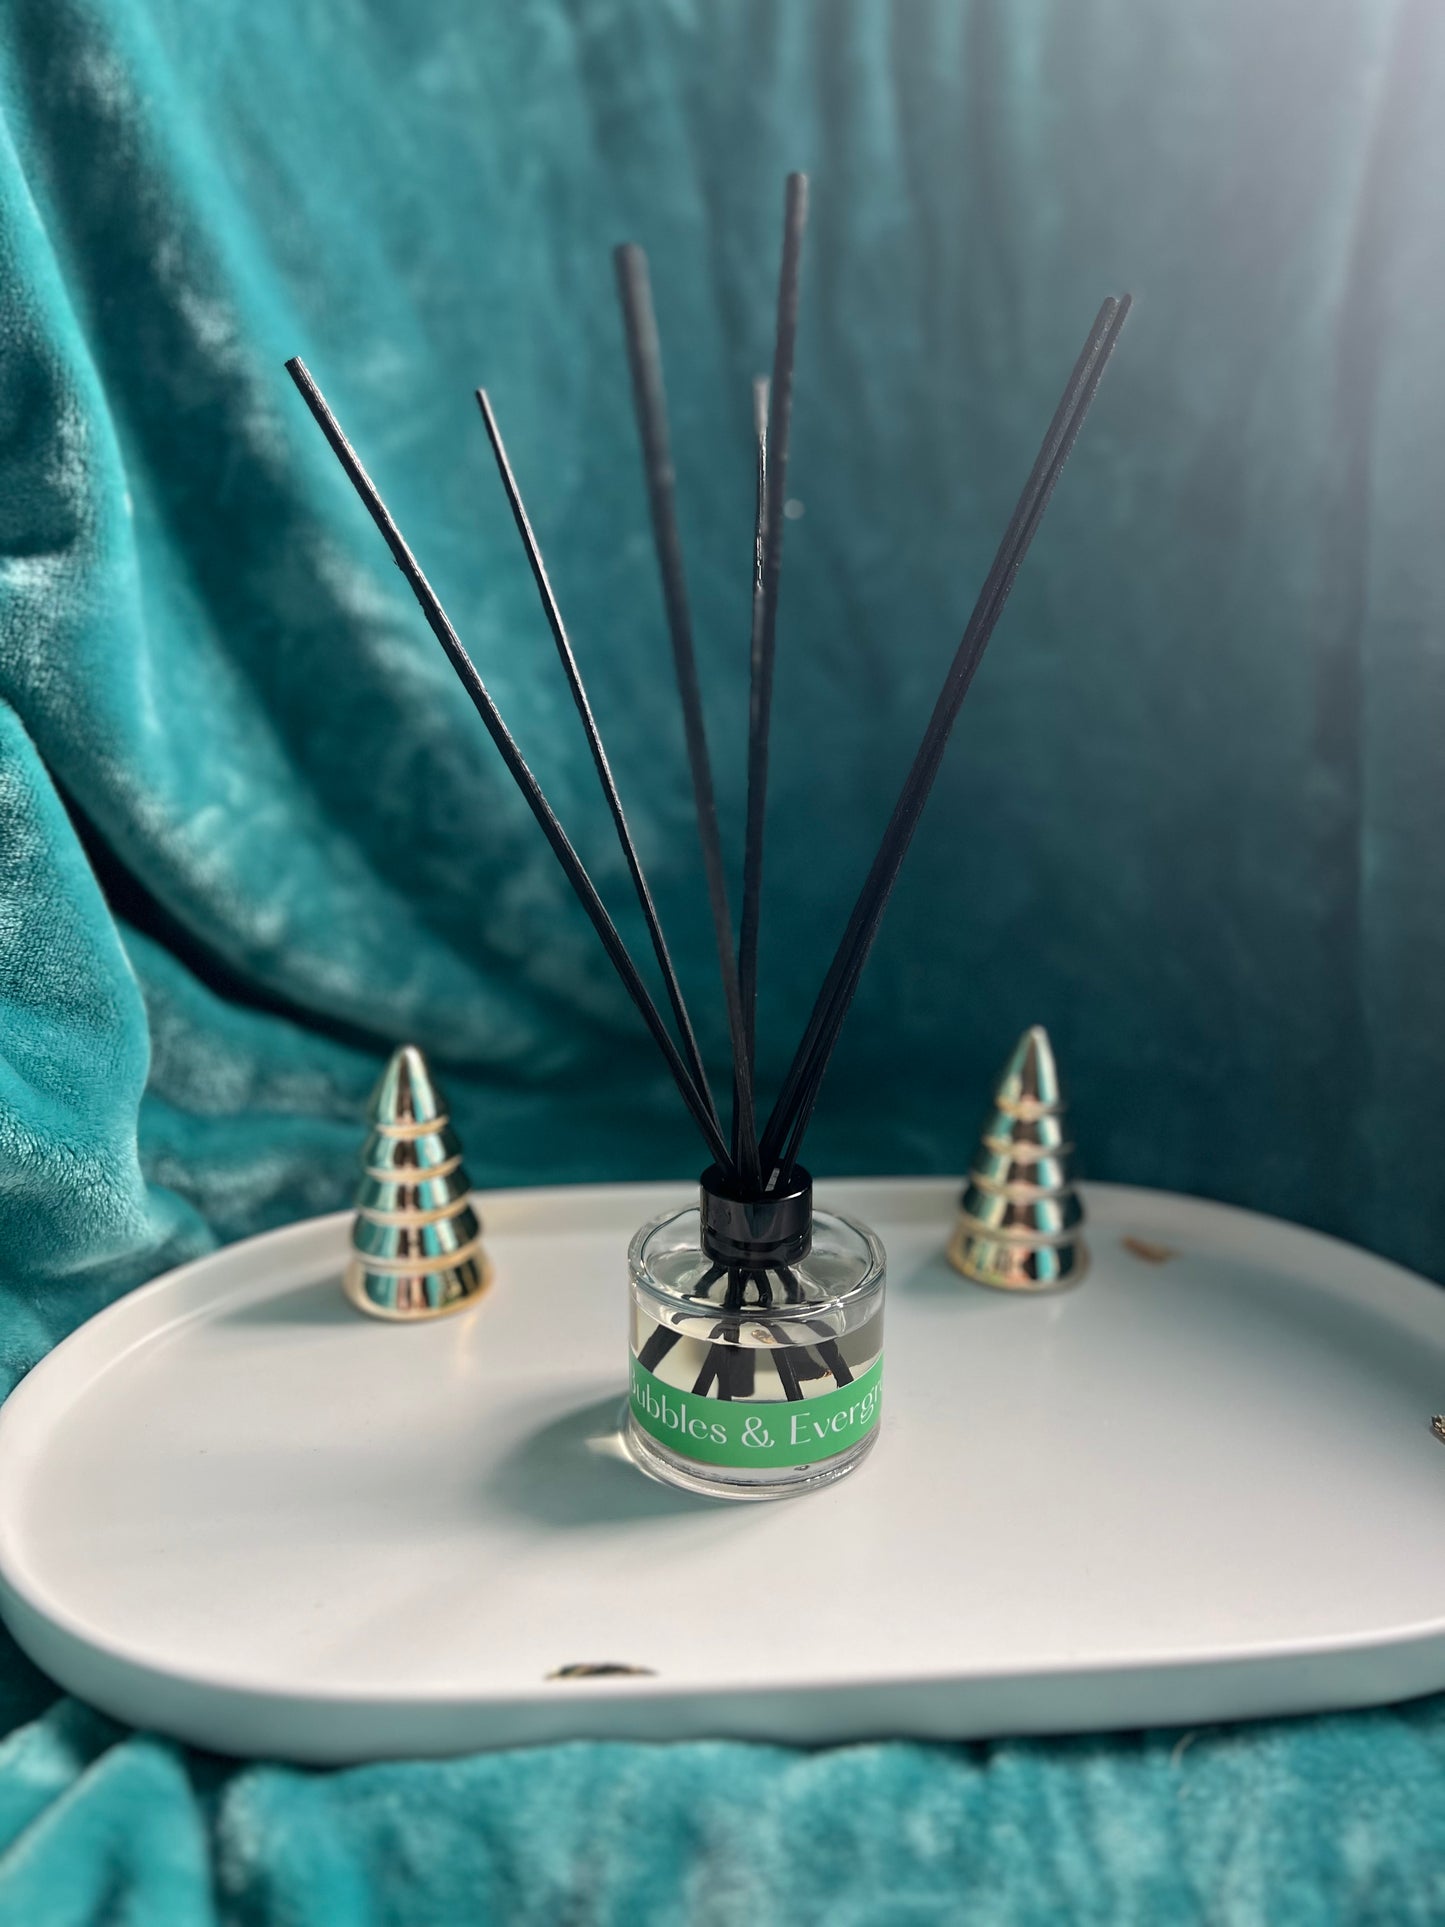 Bubbles & Evergreen Reed Diffuser